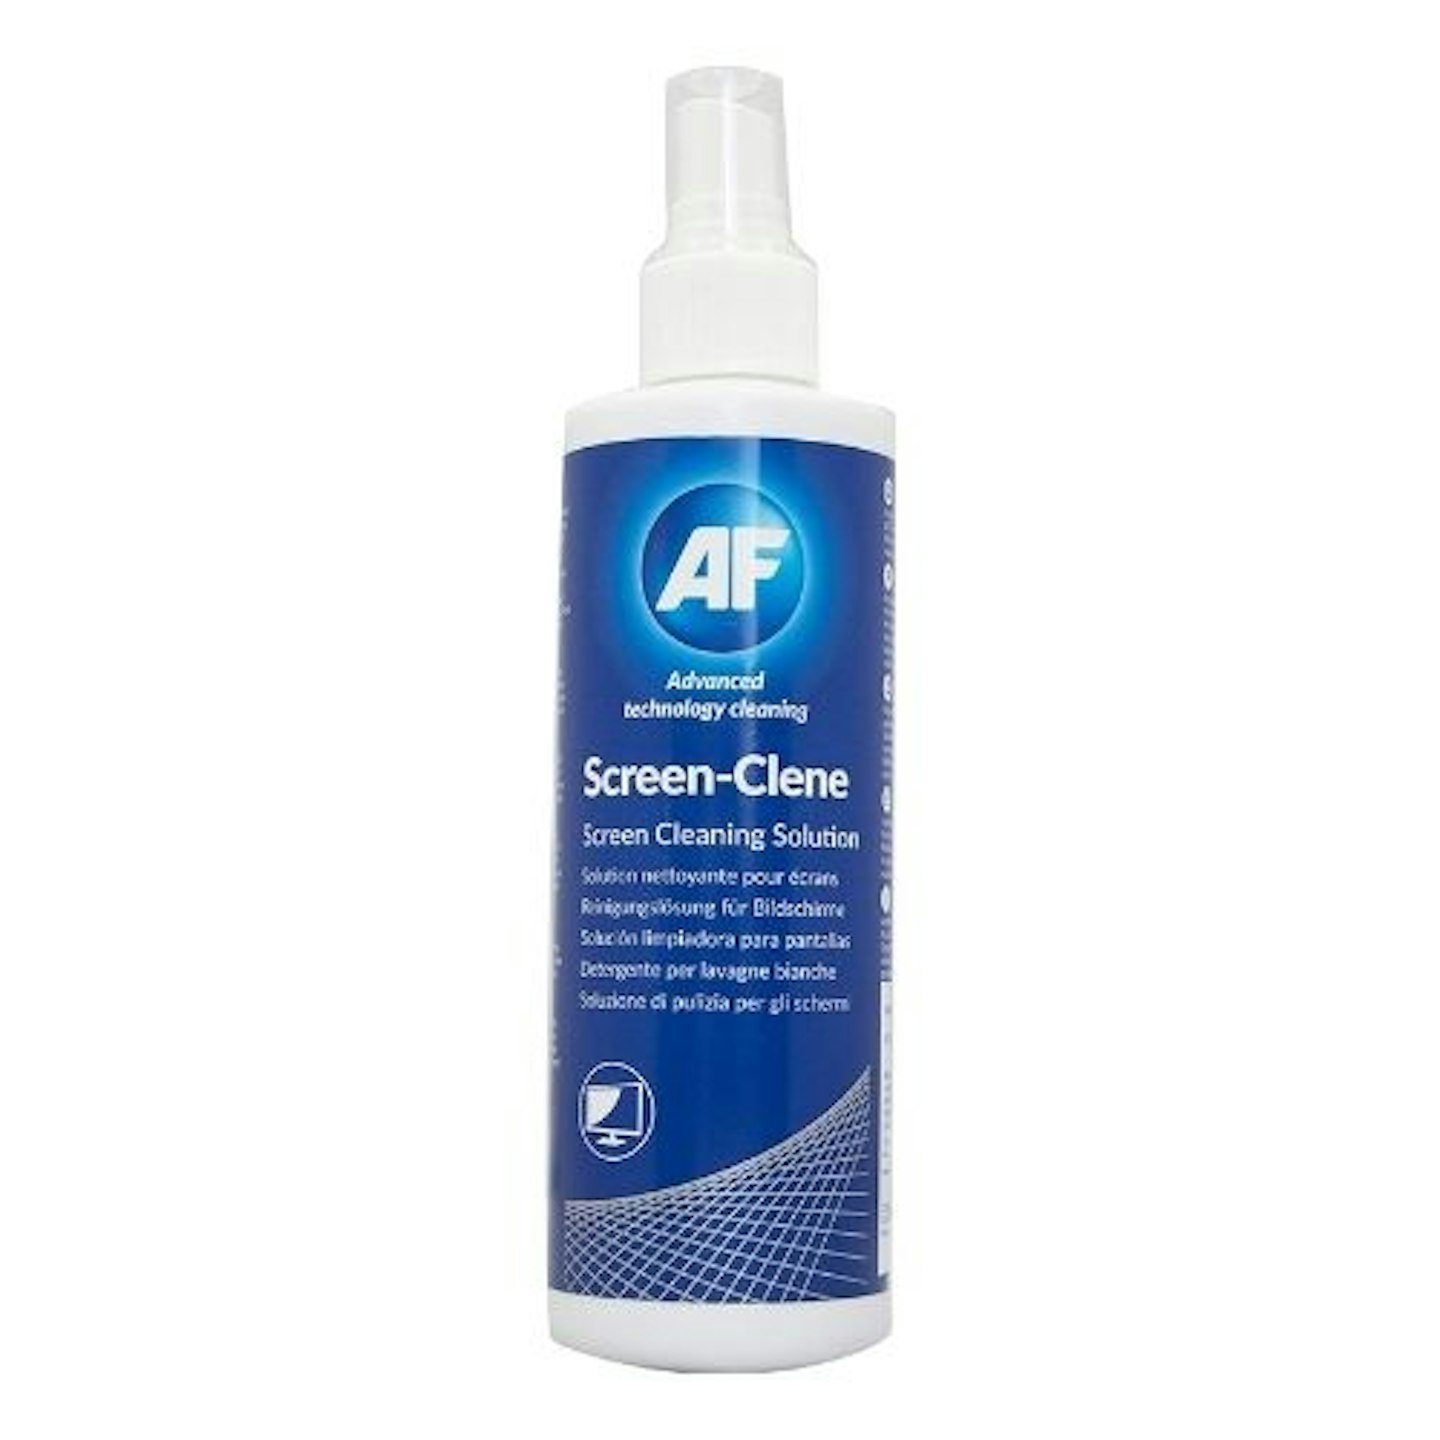  AF Screen-Clene Cleaning Spray 250ml - For Mobile Phones, TV's, Laptops, Monitors, LED, LCD, Plasma & Tablets